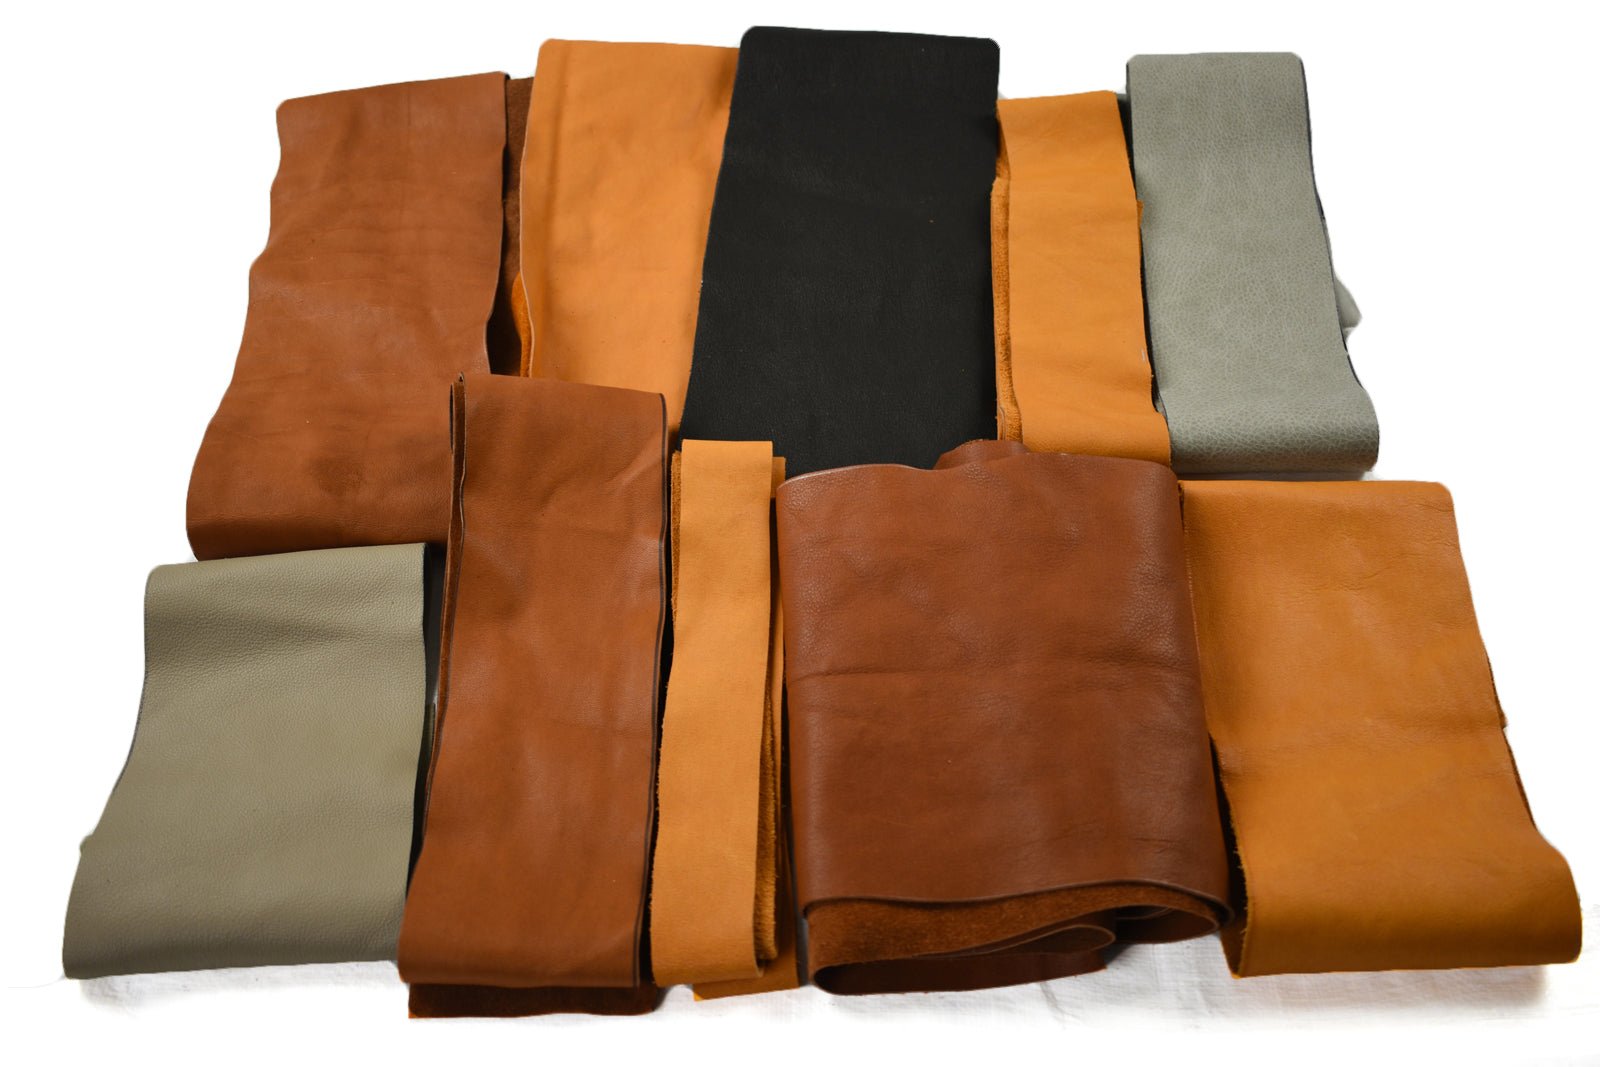 Leather offcuts 2 KG